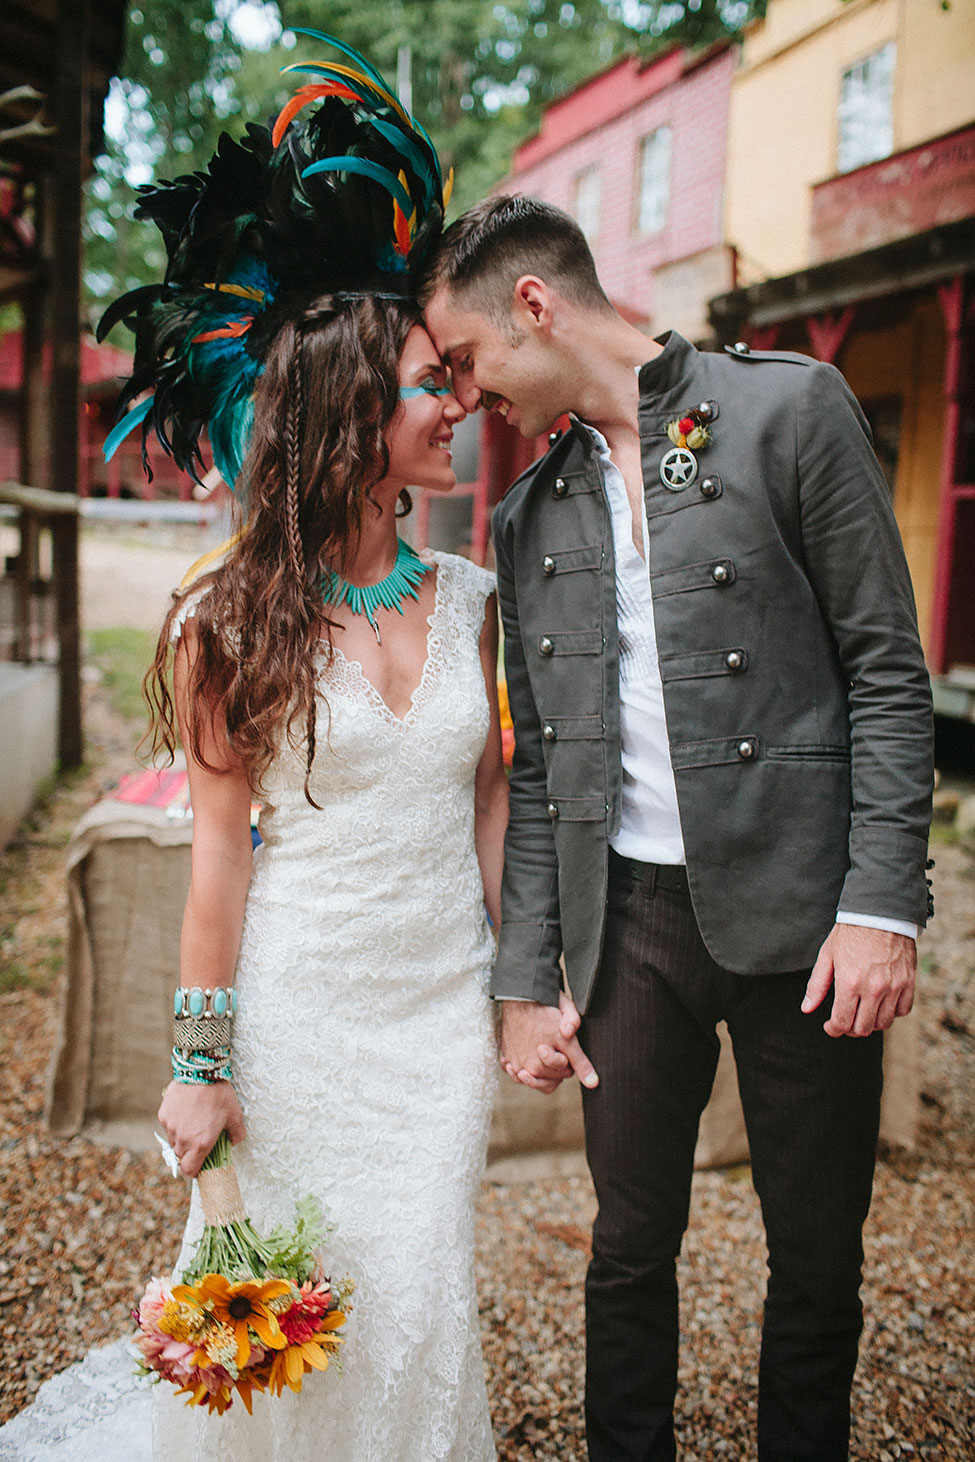 Southwestern Vibrancy & Spirit In This Frontier Take On A Lone Ranger Wedding